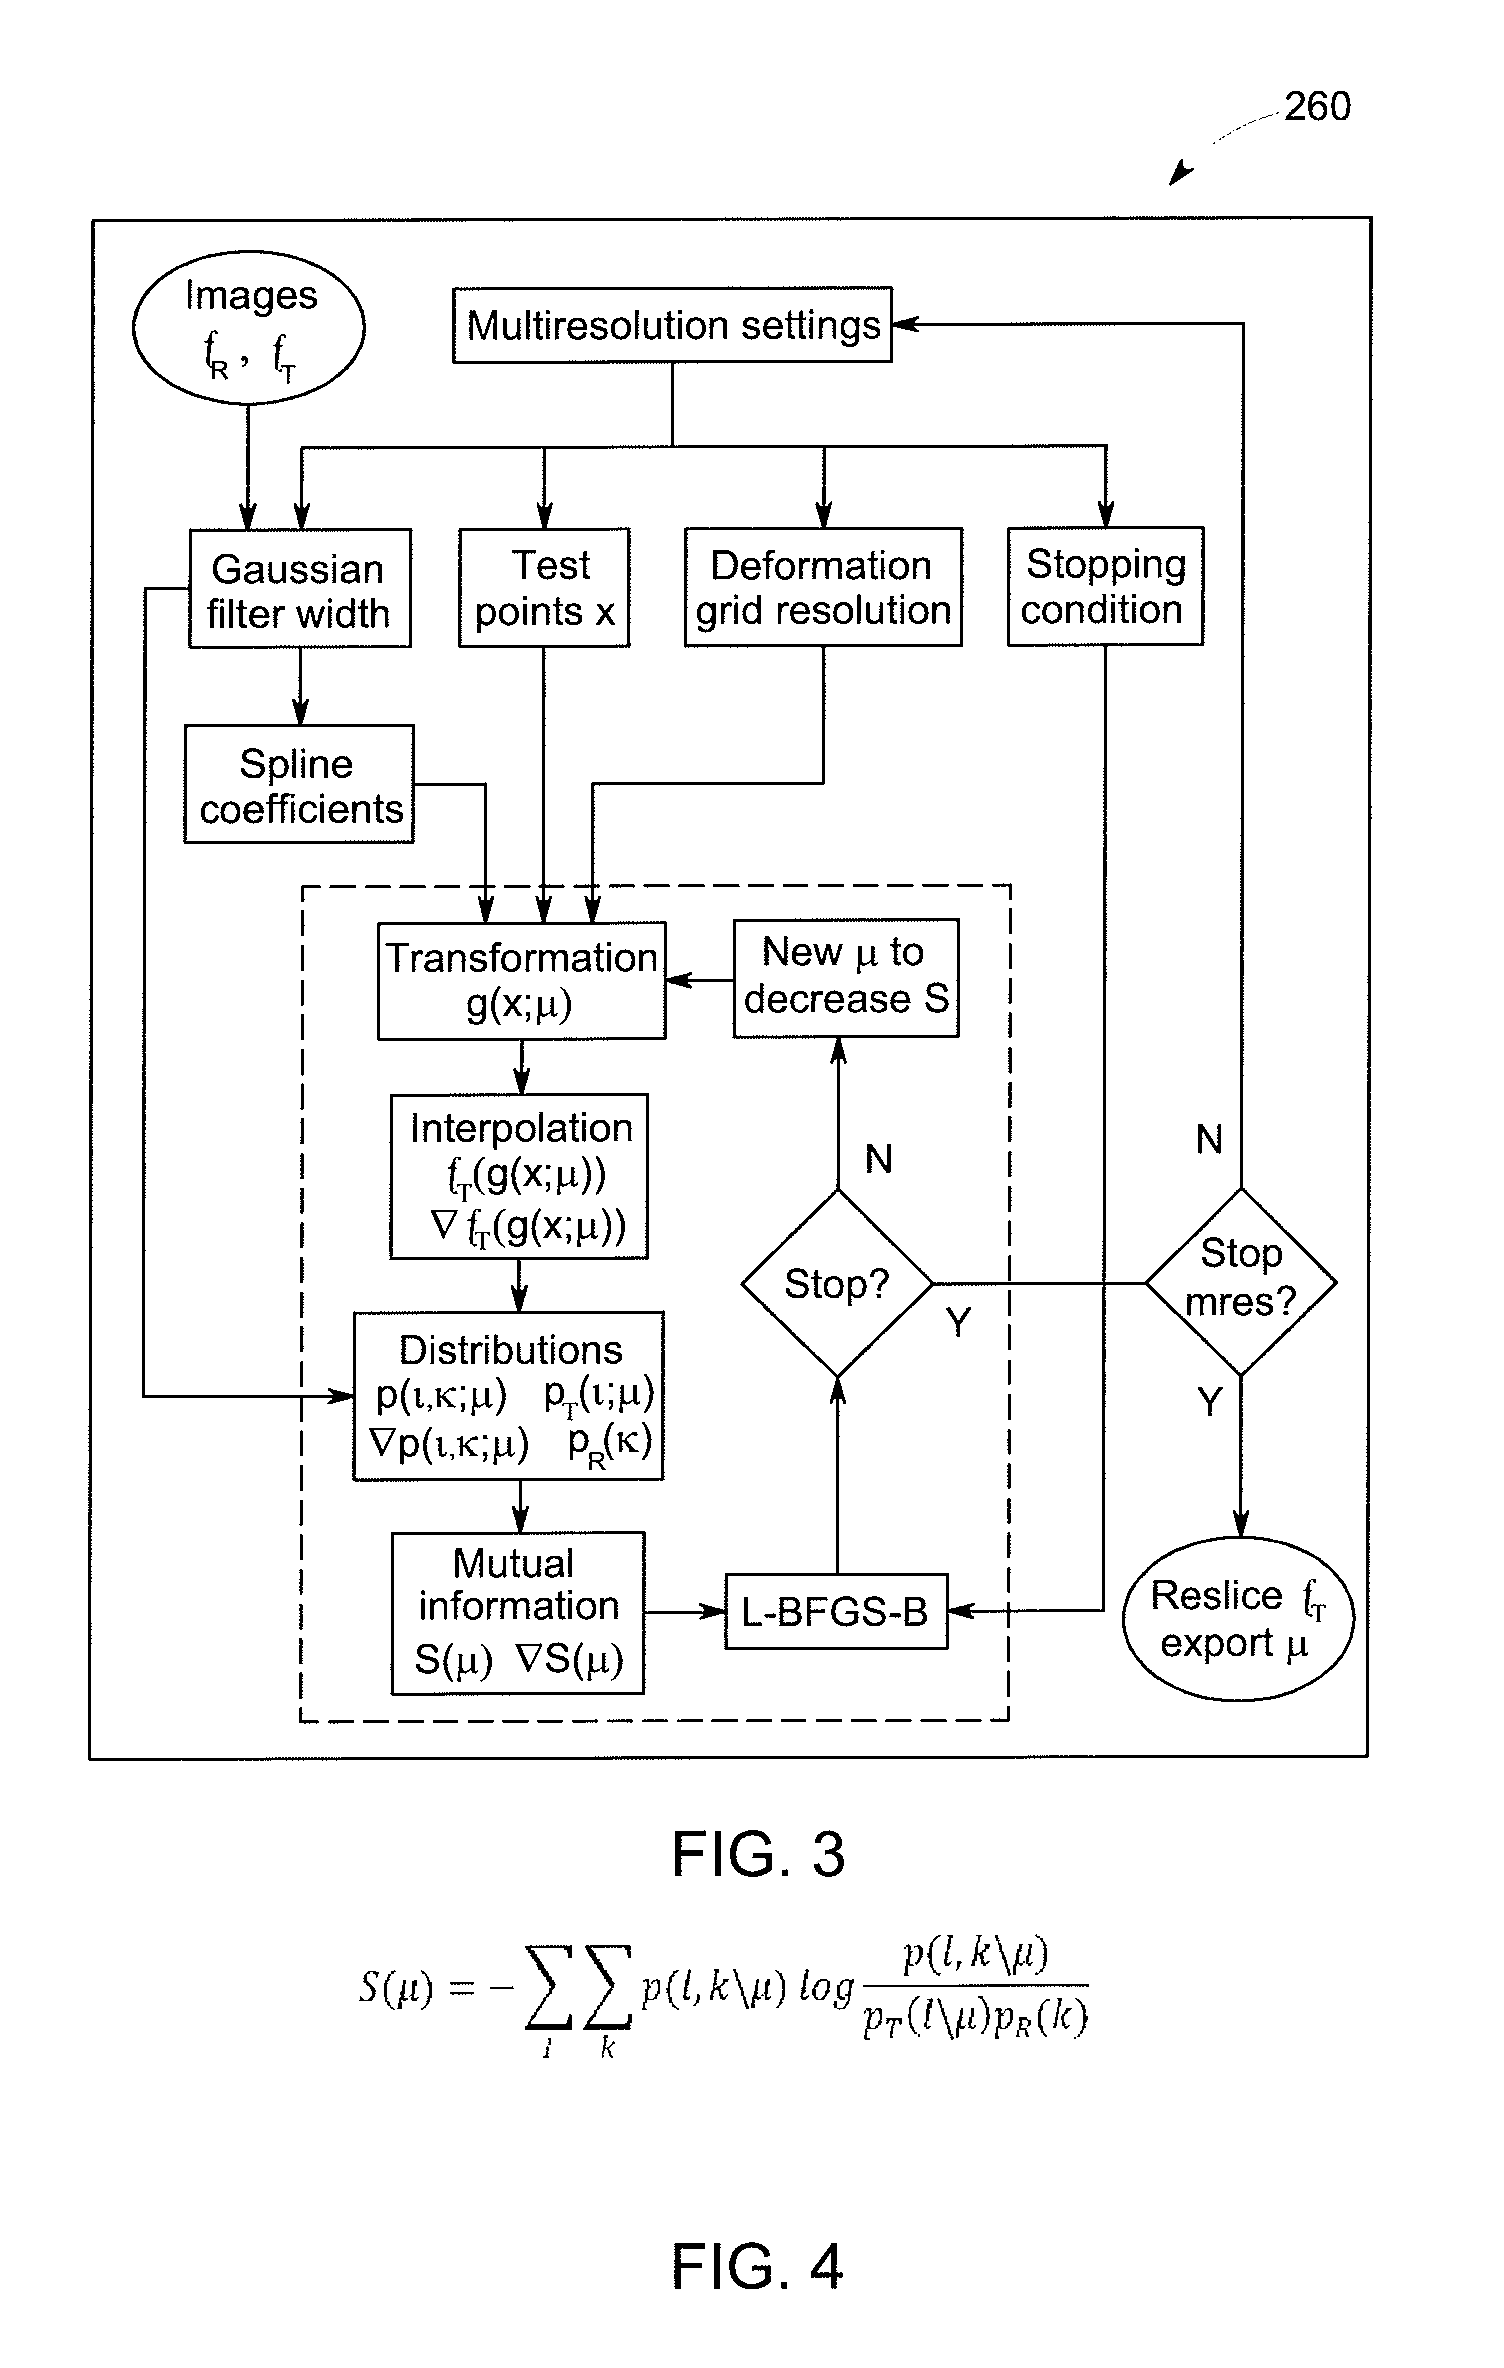 Method and apparatus for gate specific MR-based attenuation correction of time-gated PET studies